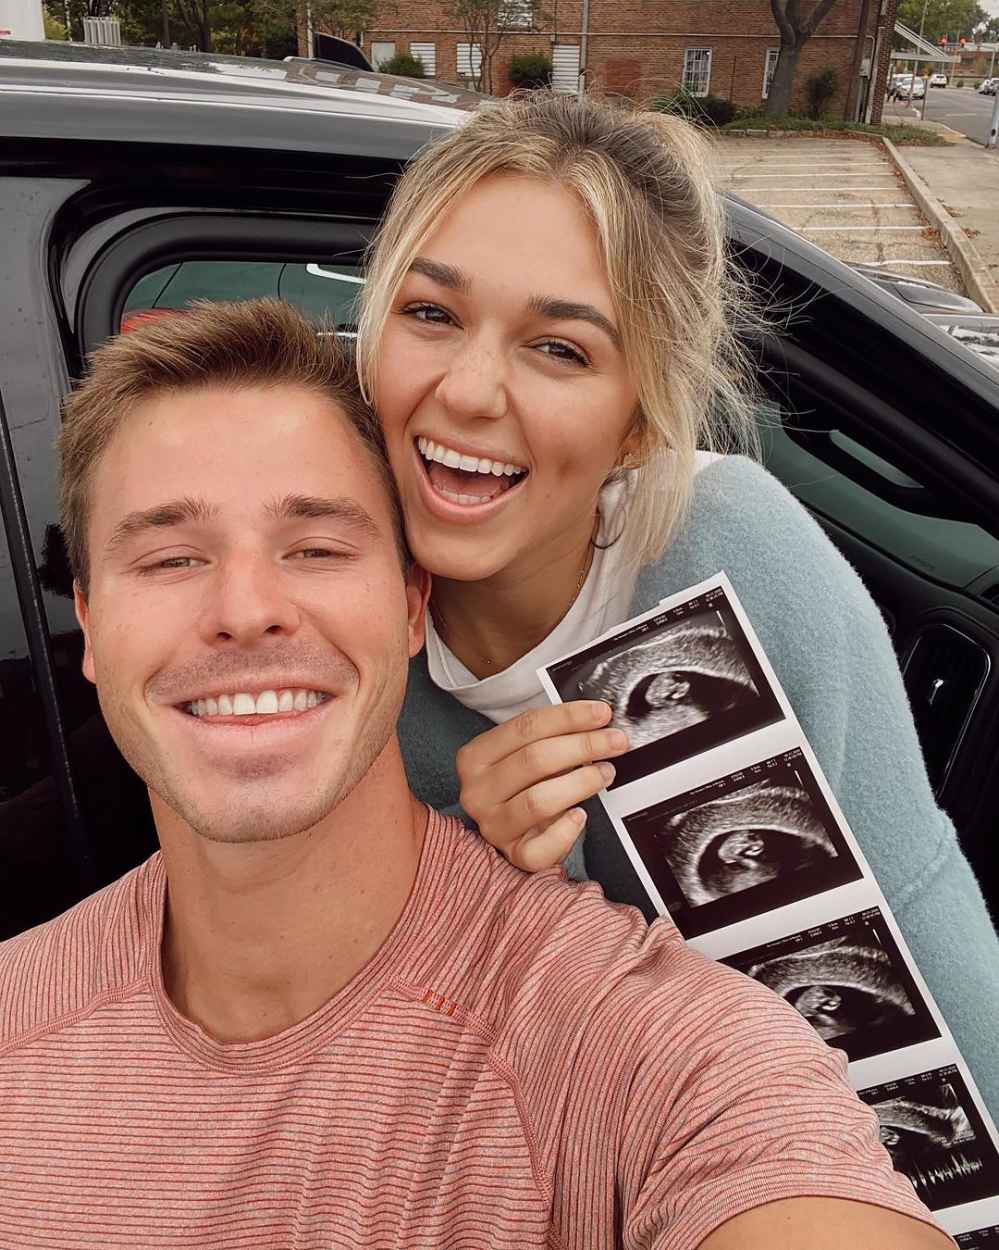 Pregnant Sadie Robertson Was ‘Super Surprised’ to Find Out She’s Expecting 1st Child With Husband Christian Huff